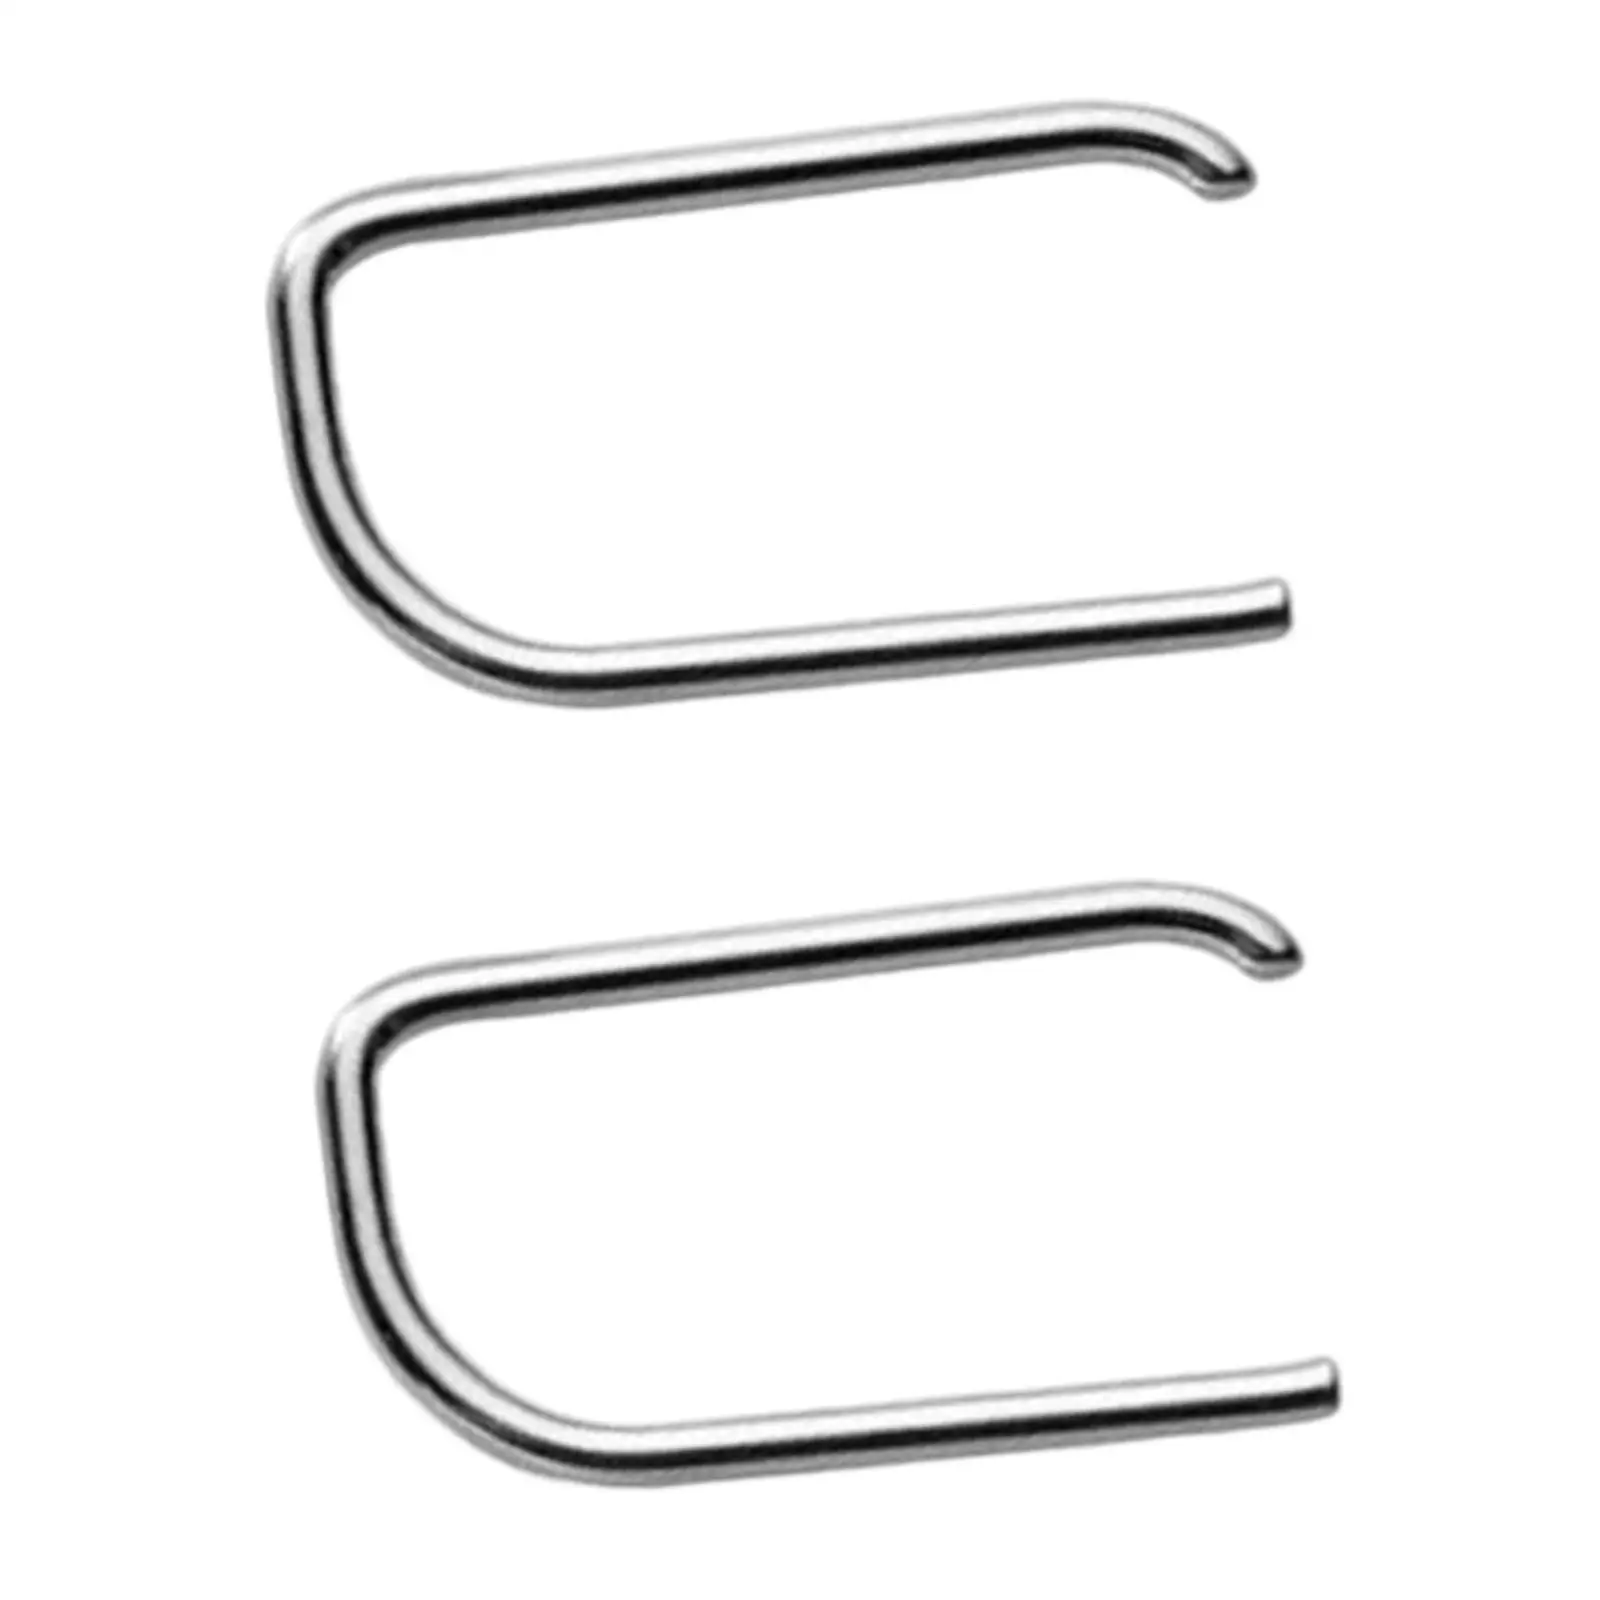 Solid 925 Sterling Argent Earrings Full Strip Staples Fashion Ear Studs Bar Studs Ear Jewelry for Women Girls Birthday Gifts images - 6